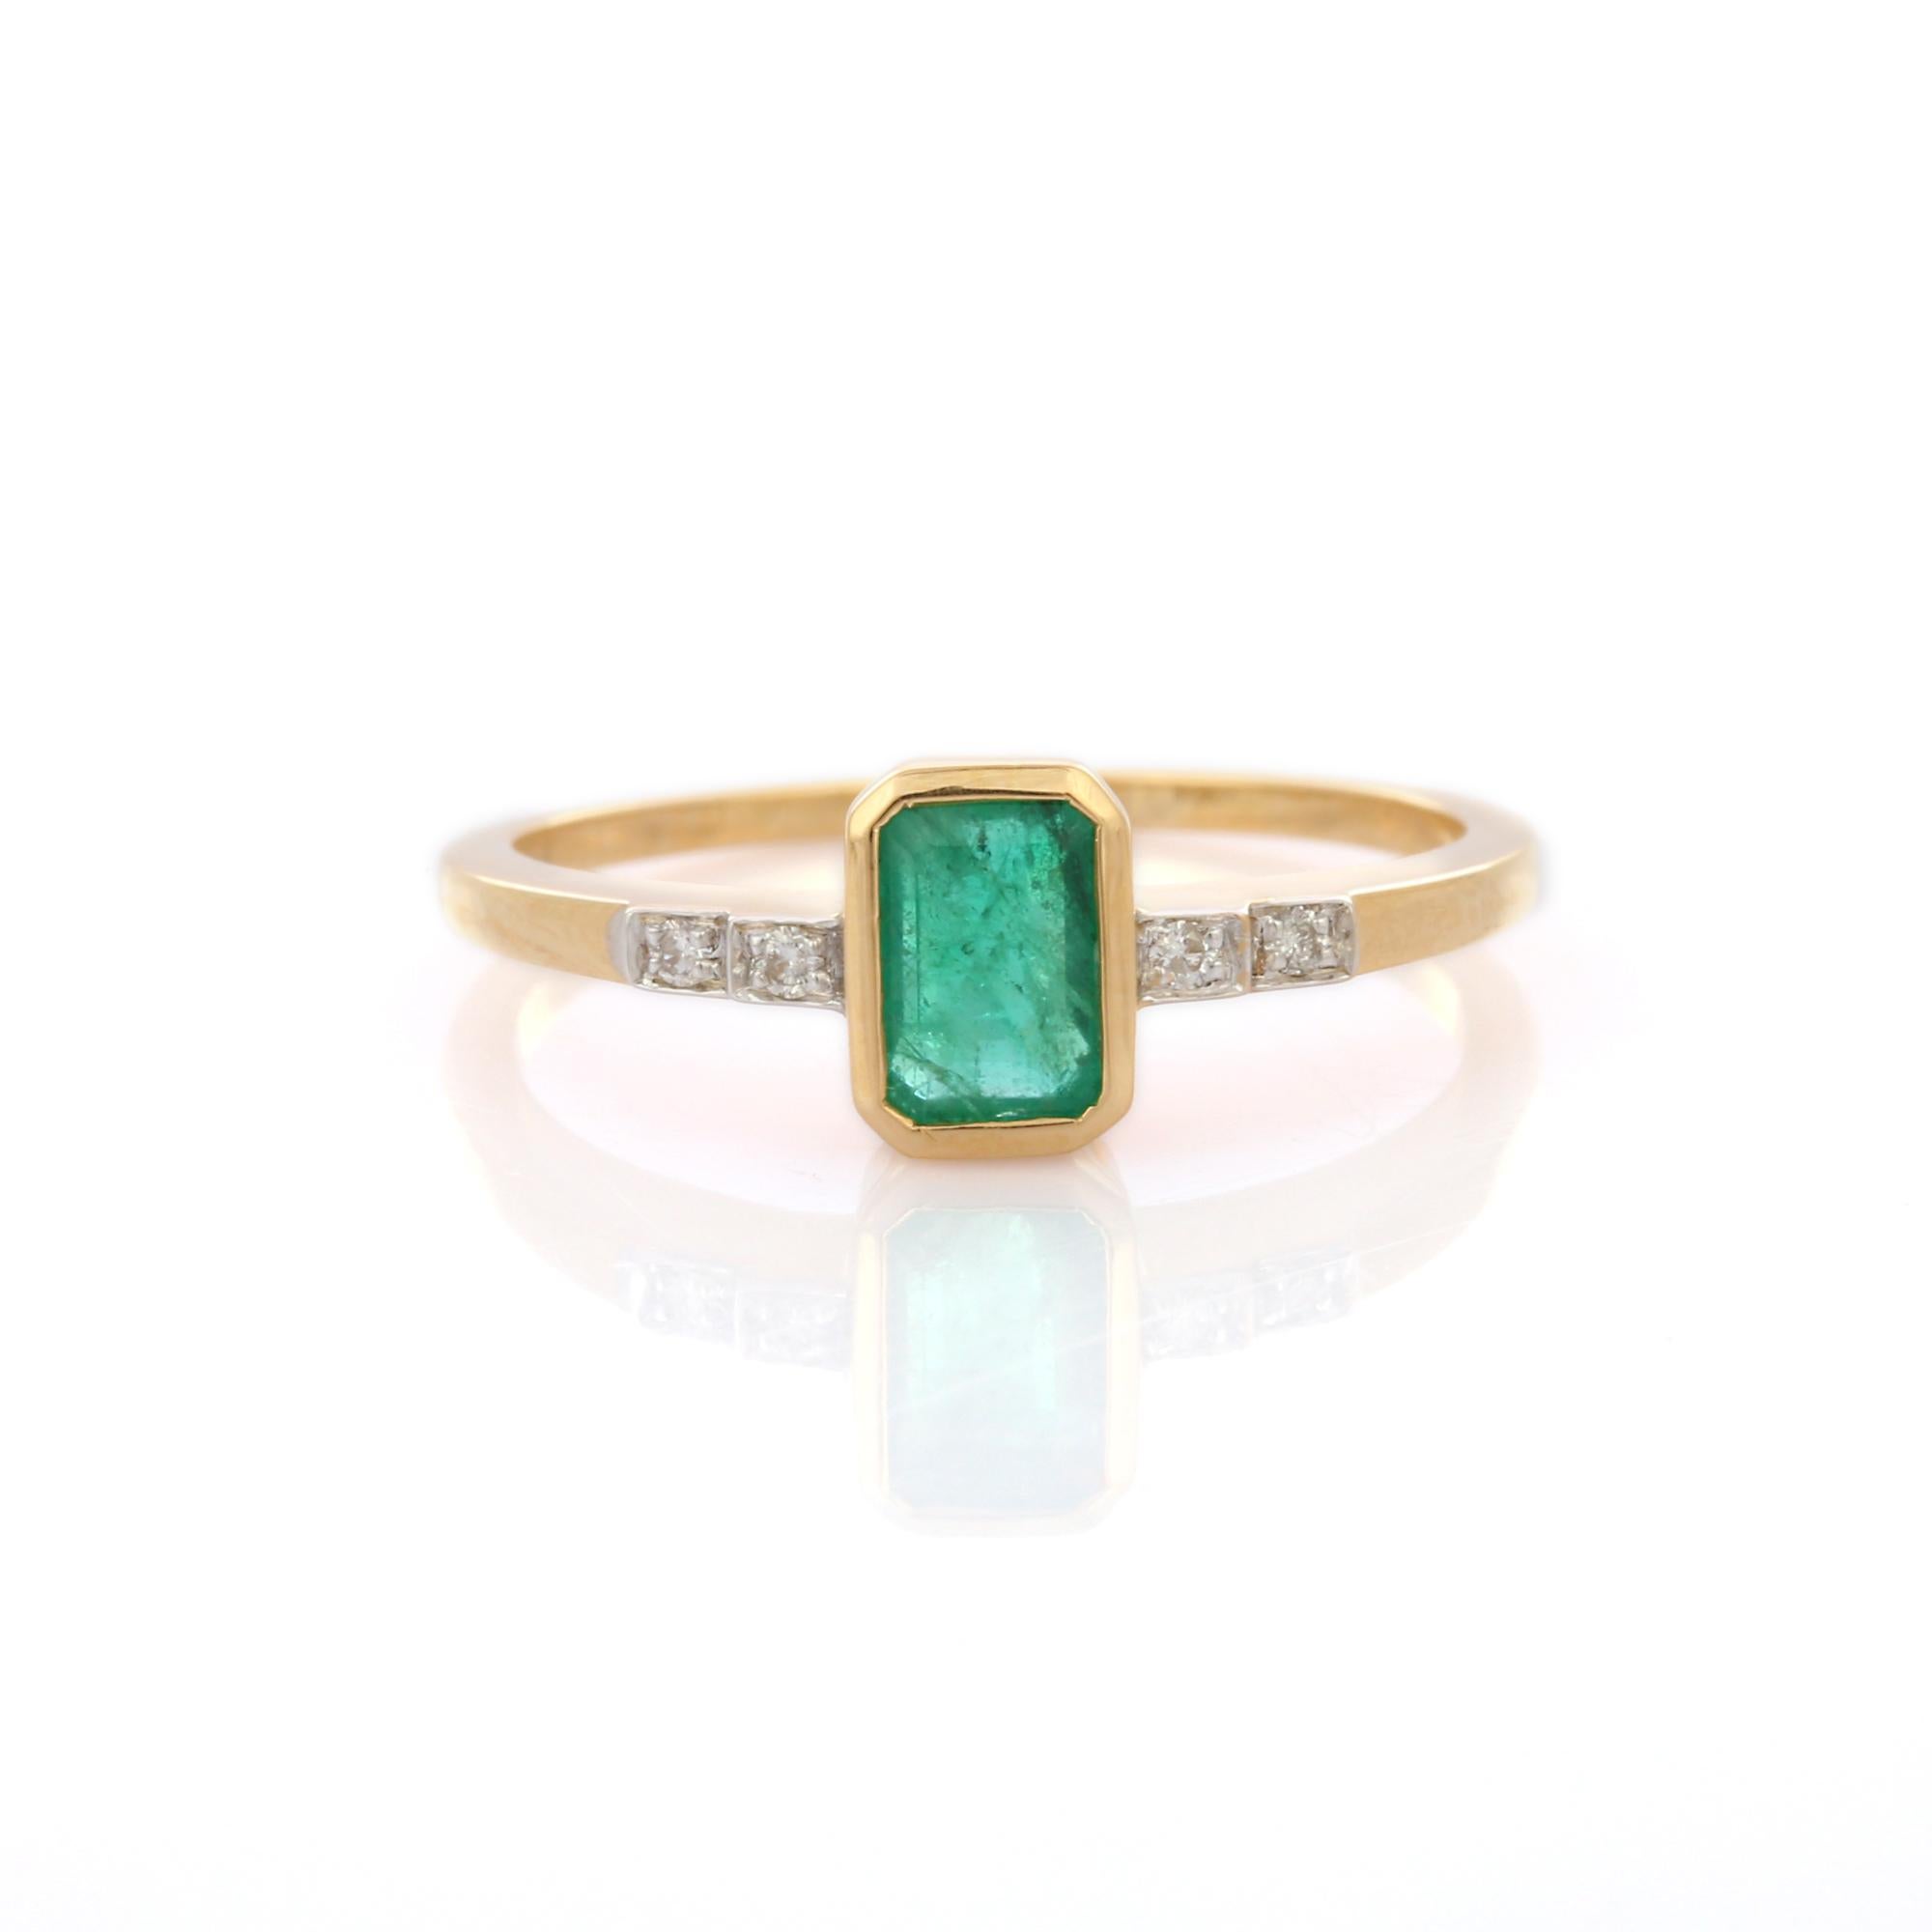 For Sale:  18K Yellow Gold Octagon Cut Emerald and Diamond Stackable Ring, Gift for Her 6